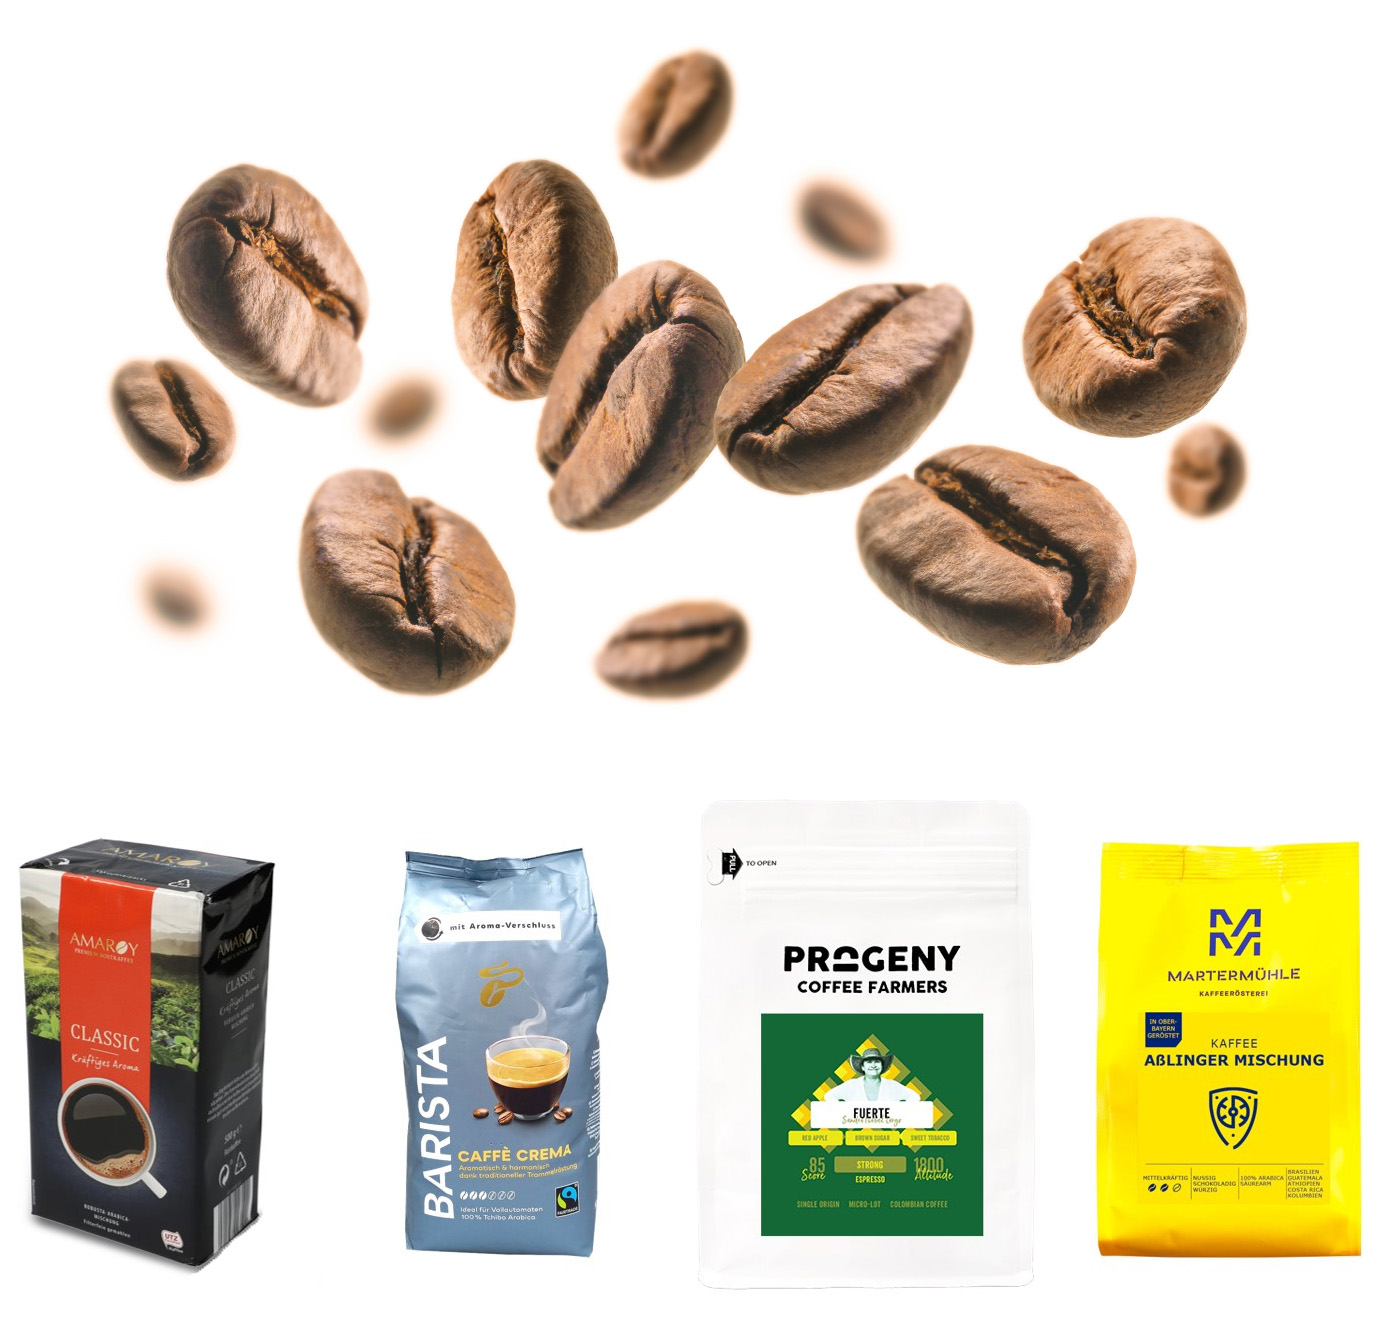 Coffee beans raining on five packages of different coffee brands that were analyzed by the industrial food sensor HaVoc® Sensory System